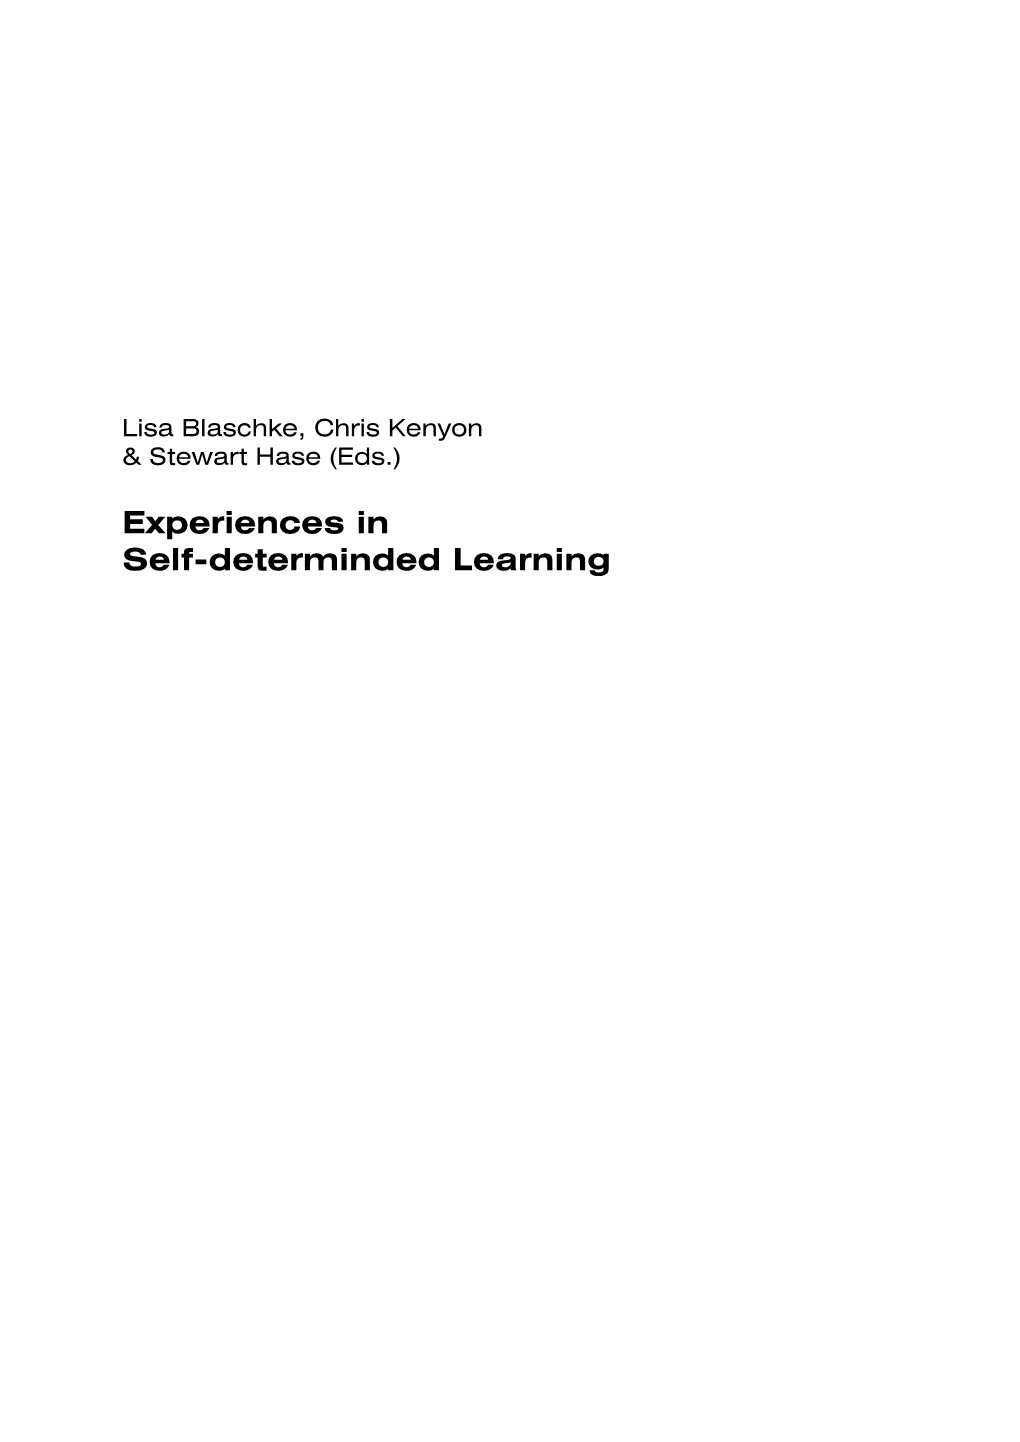 Experiences in Self-Determined Learning